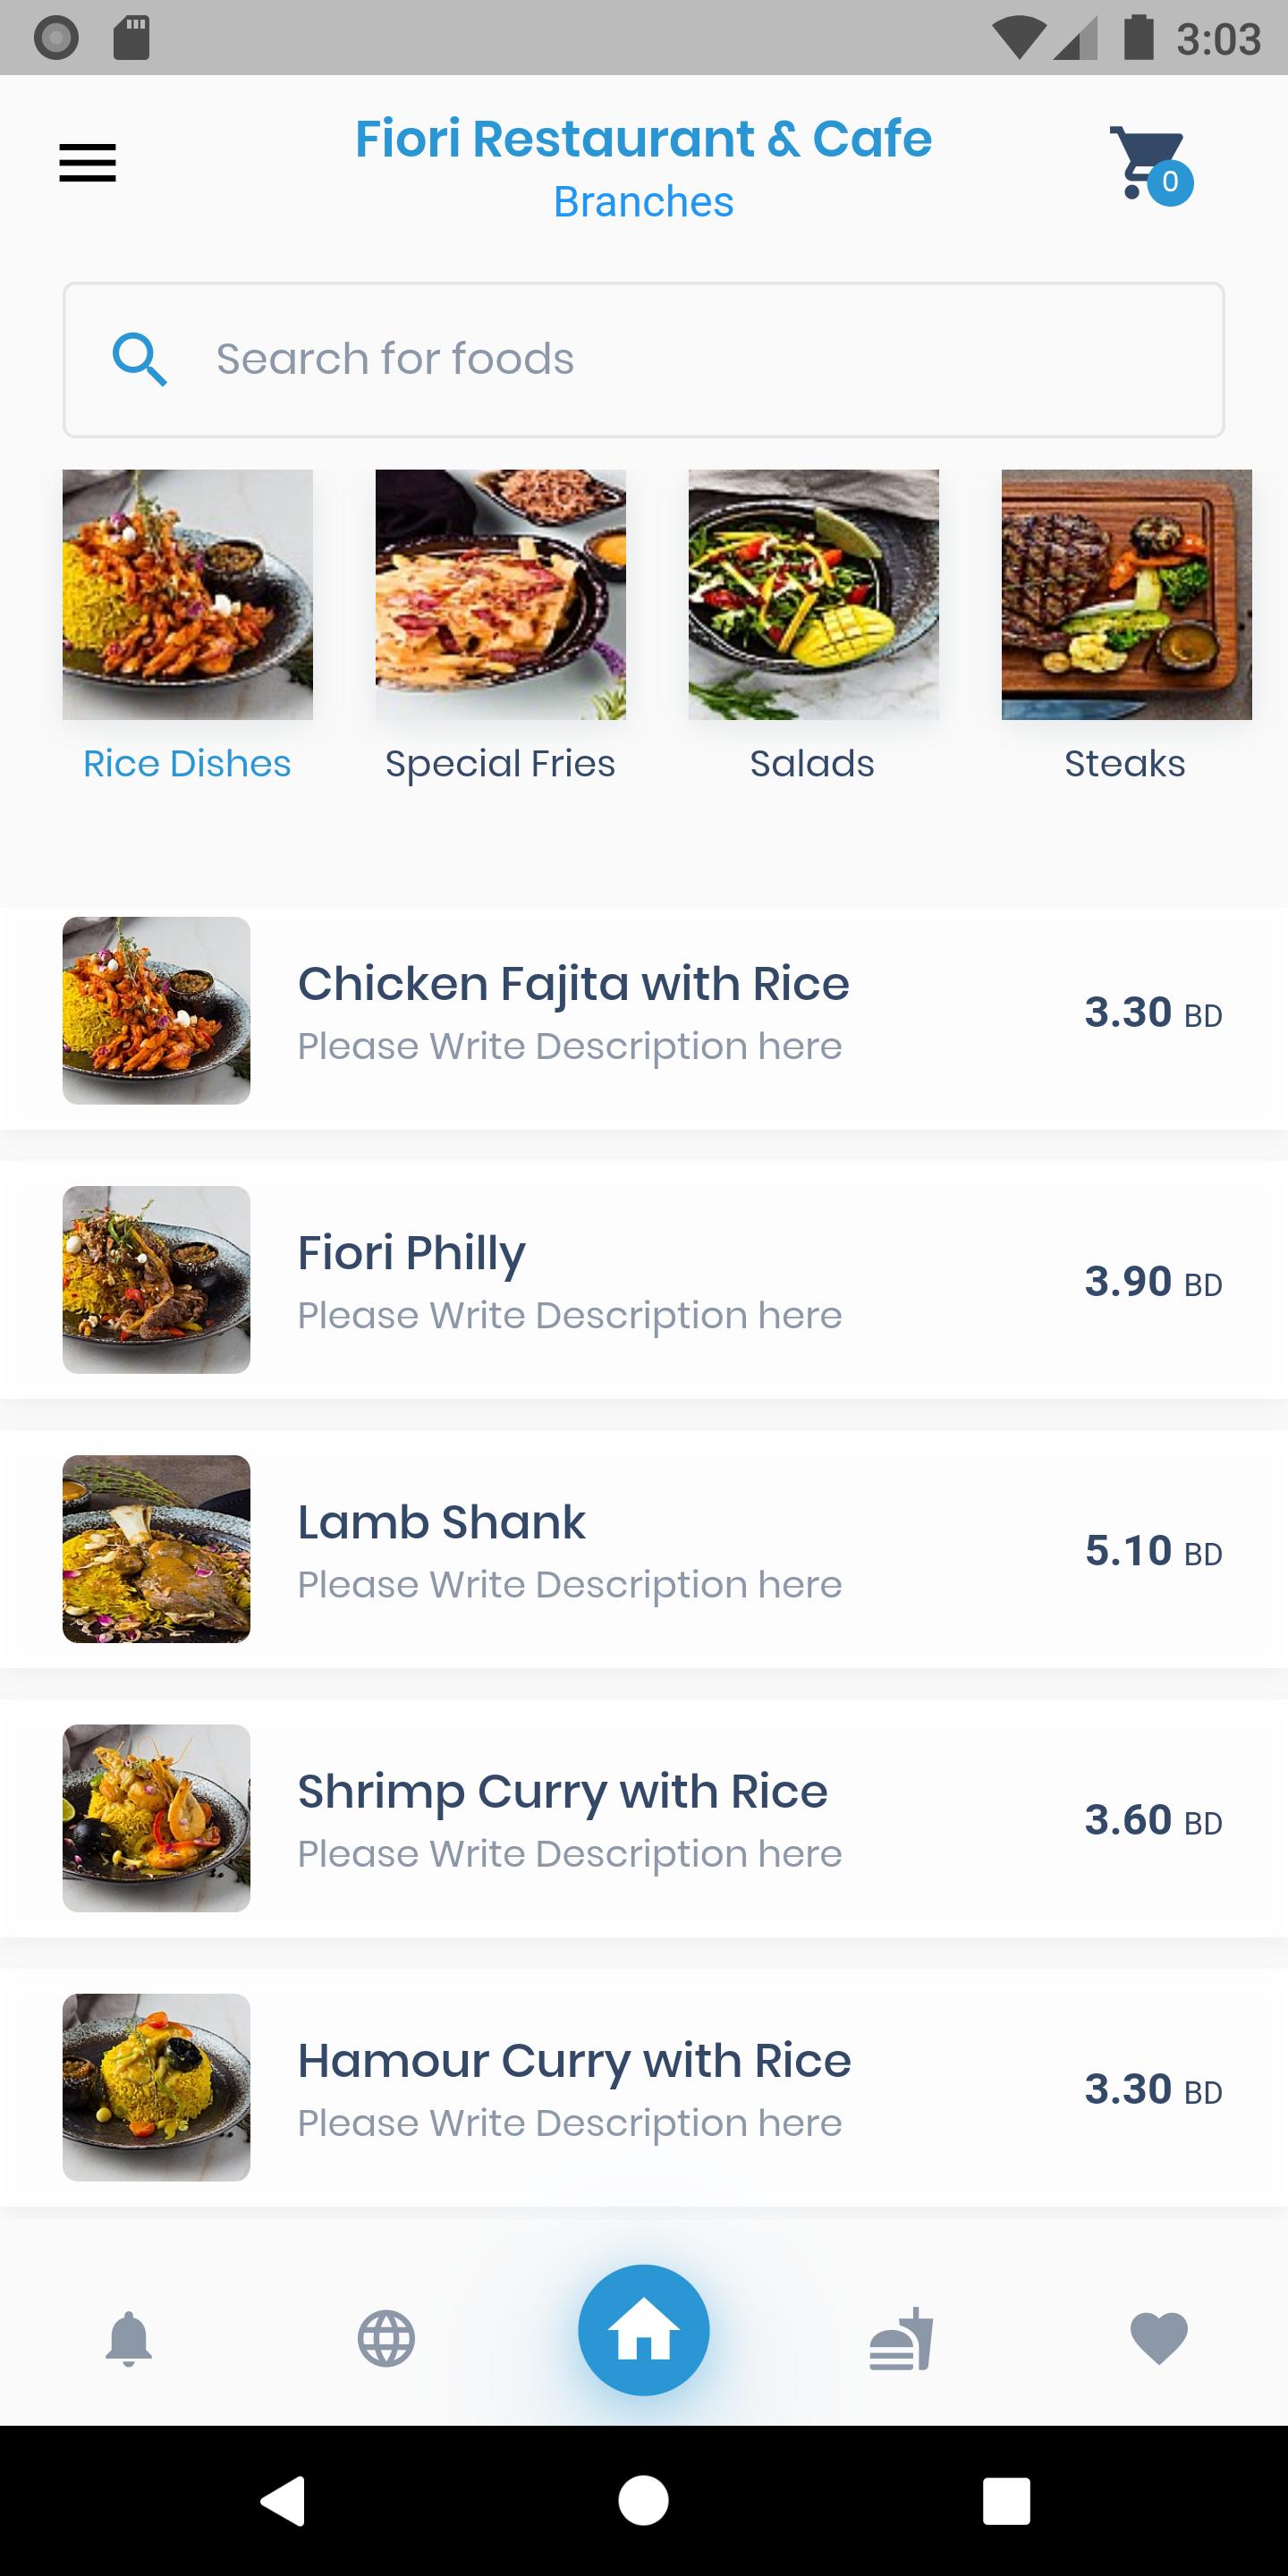 Fiori Restaurant & Cafe for Android - APK Download